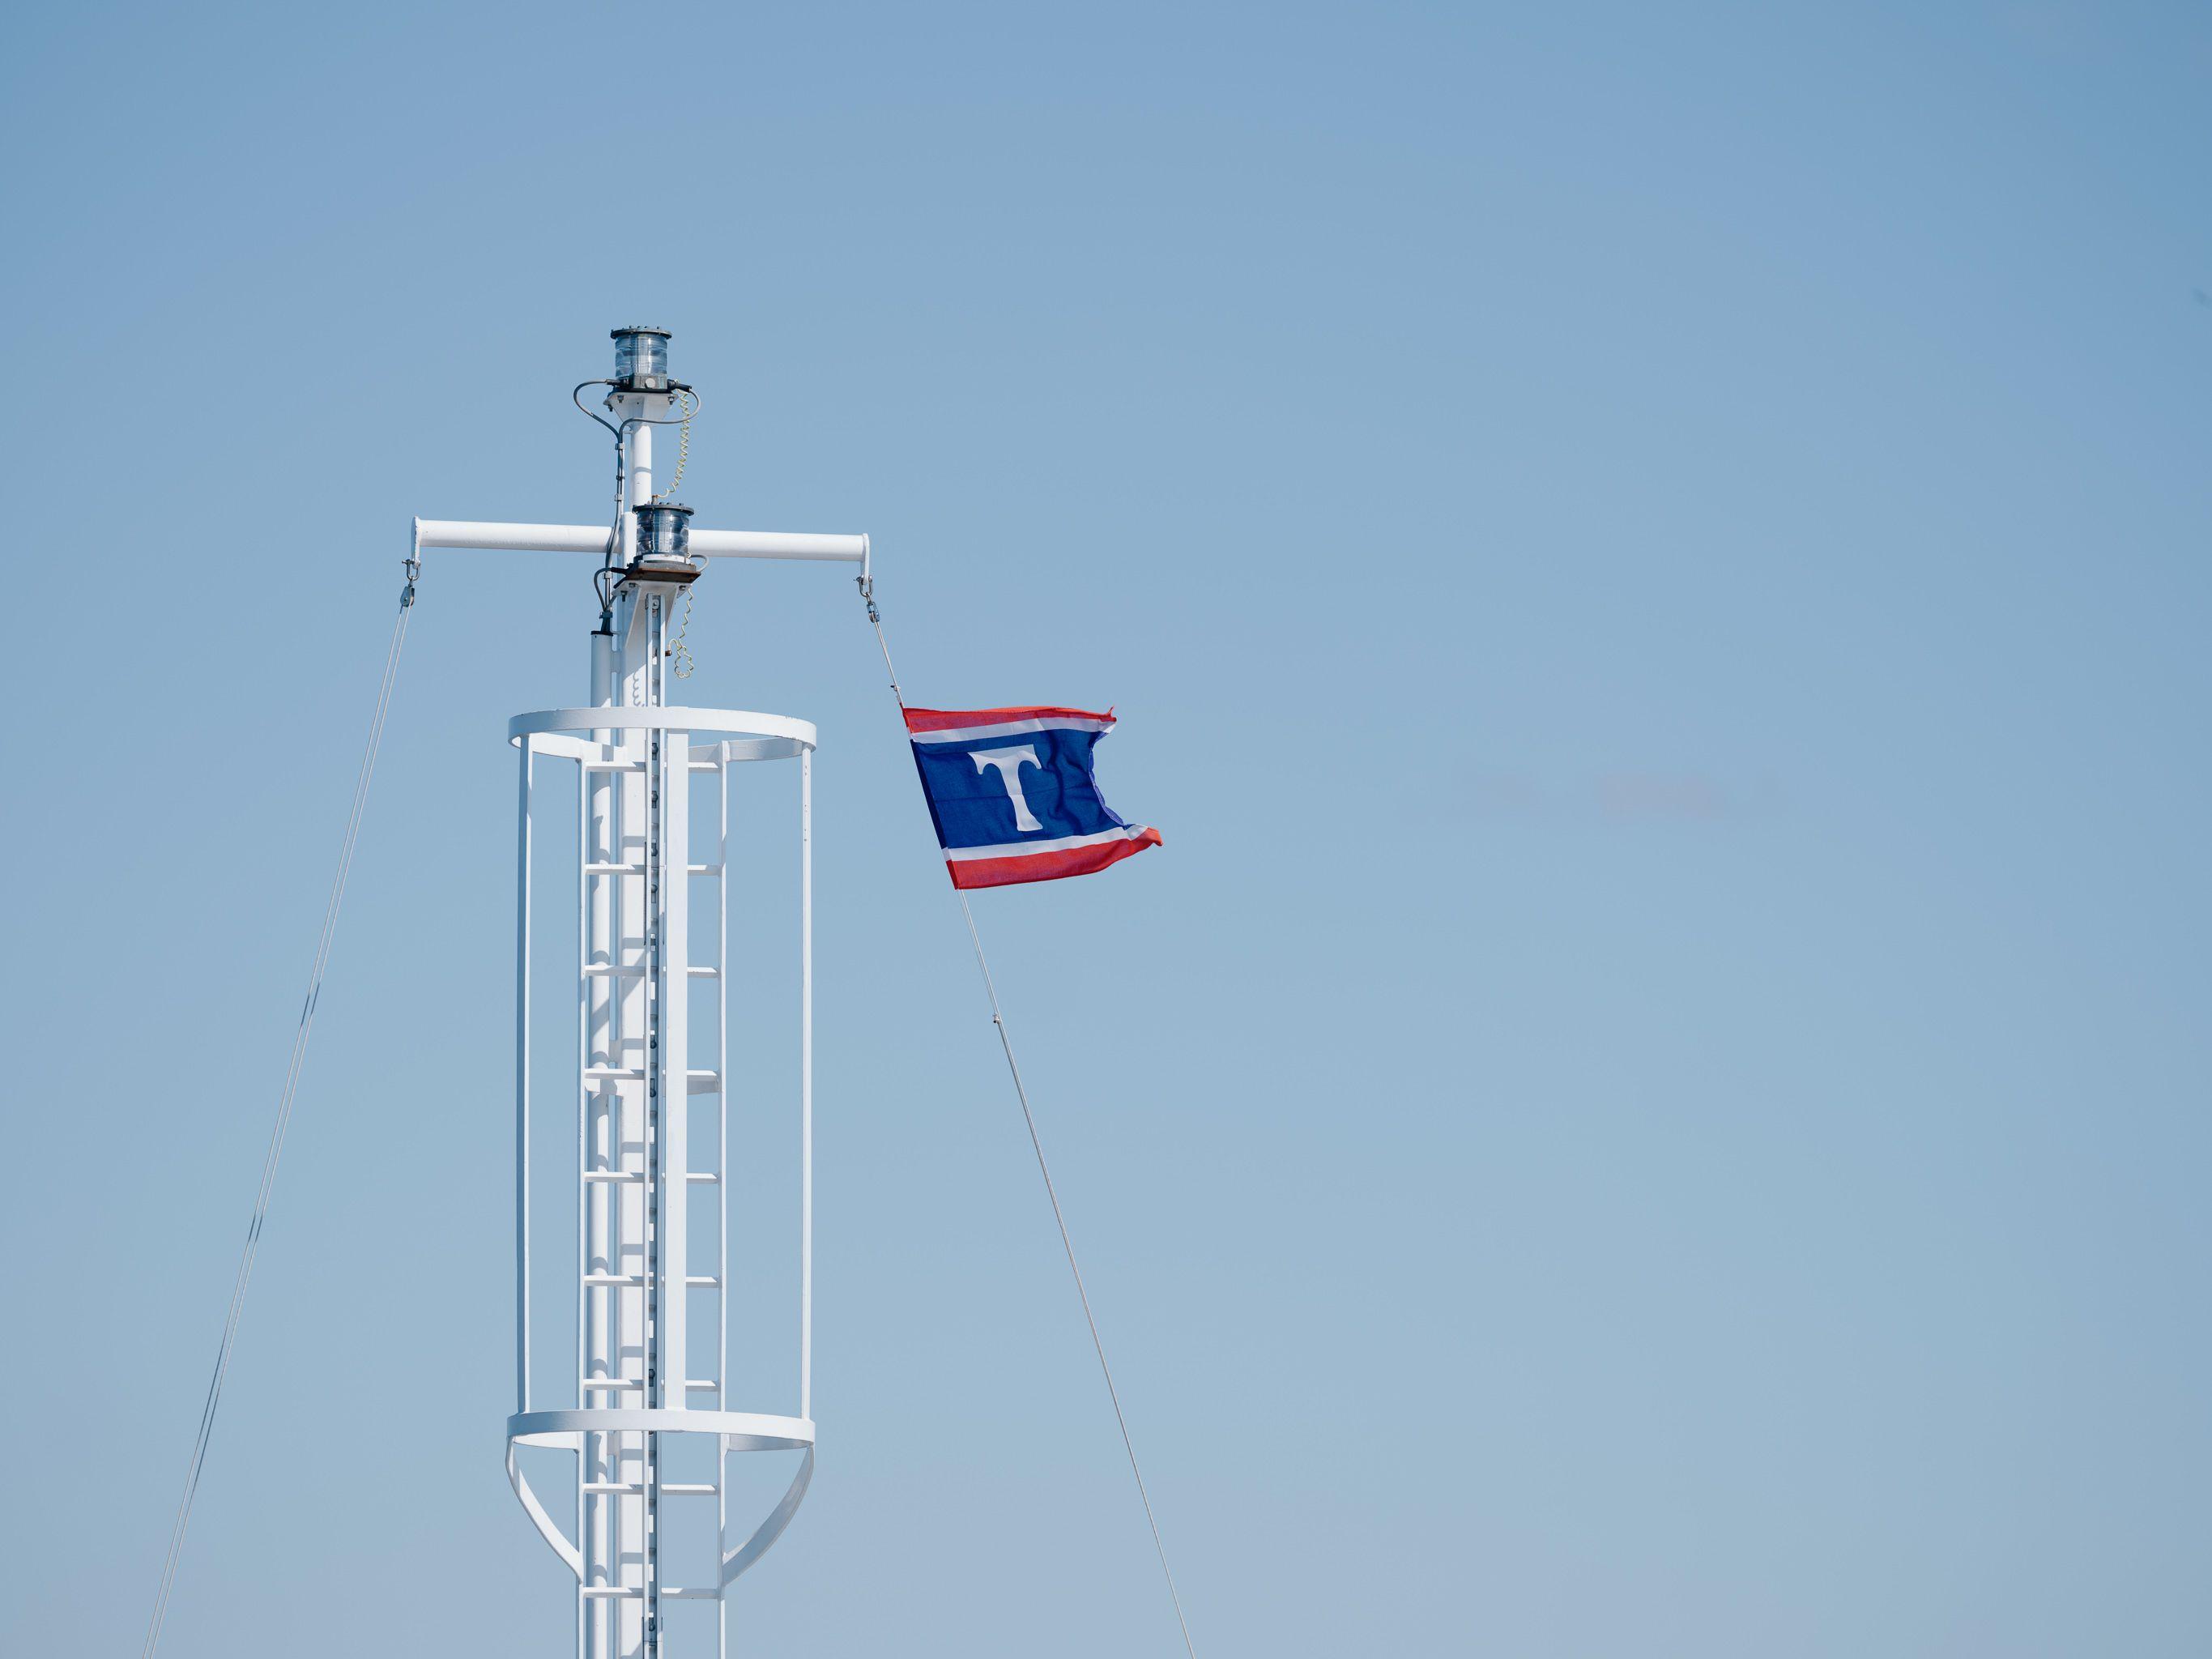 A ferry mast with Torghattens blue, red and white shipping flag.